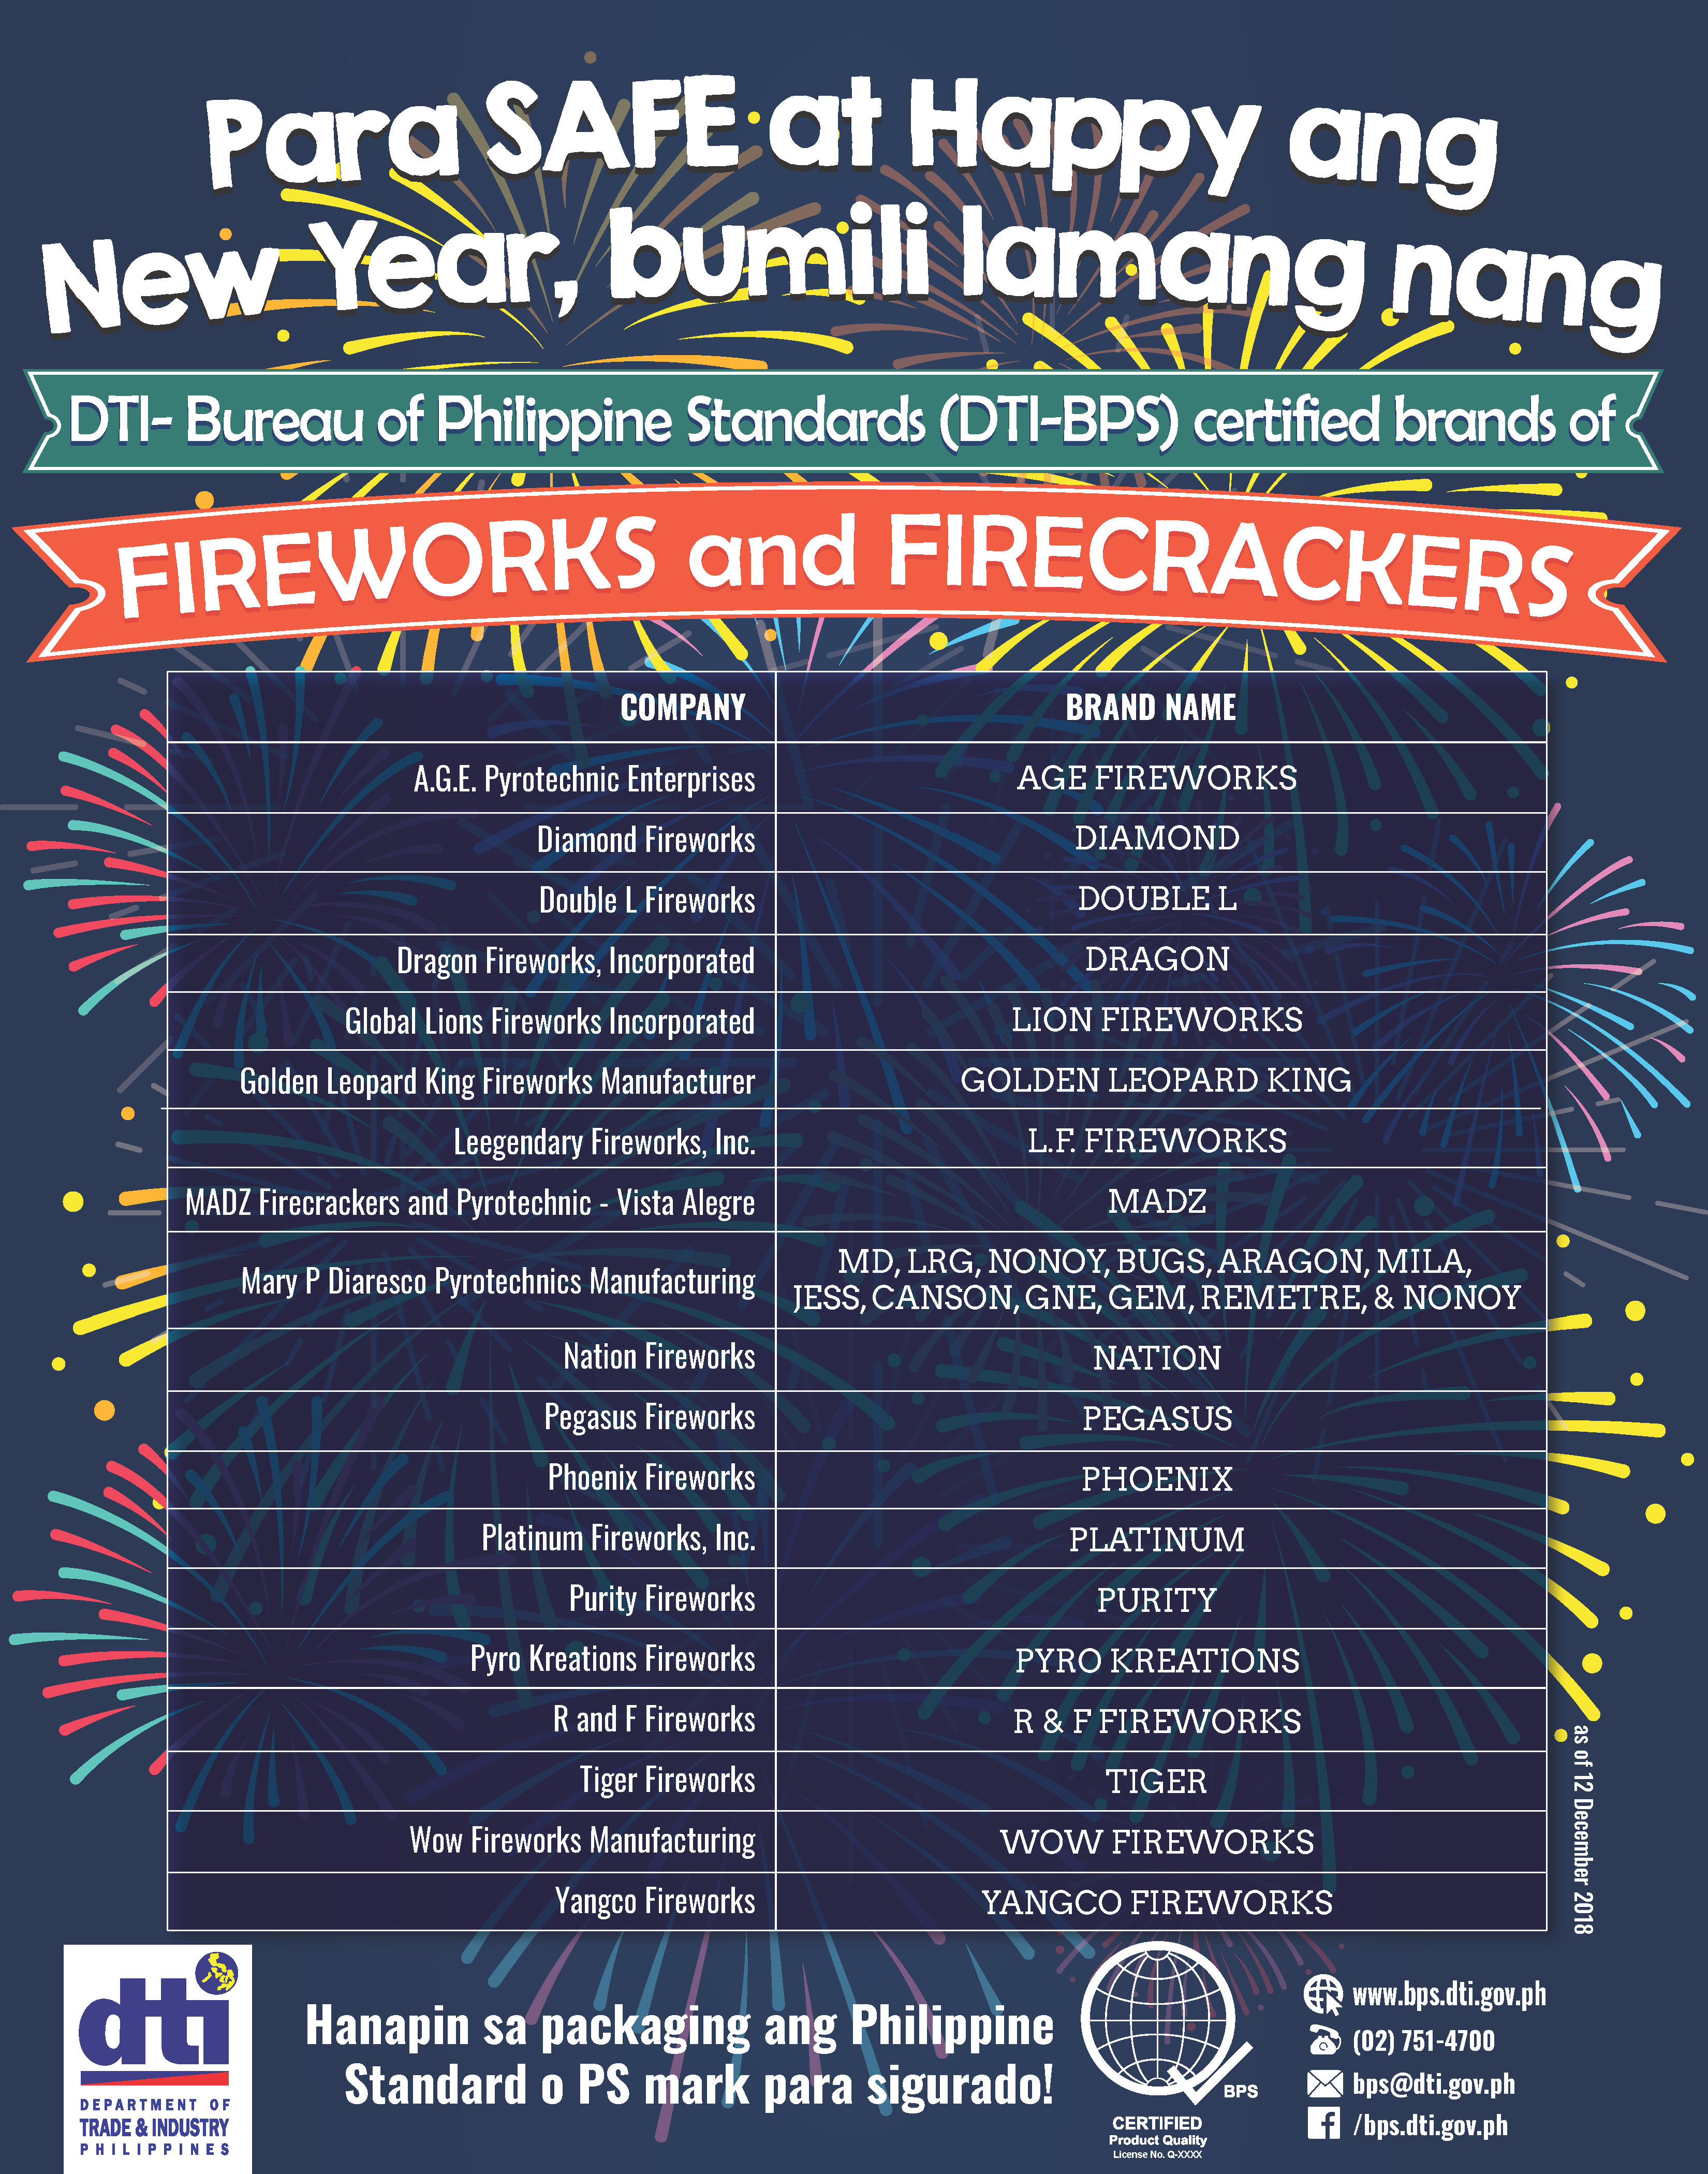 List of DTI-BPS certified fireworks and firecrackers